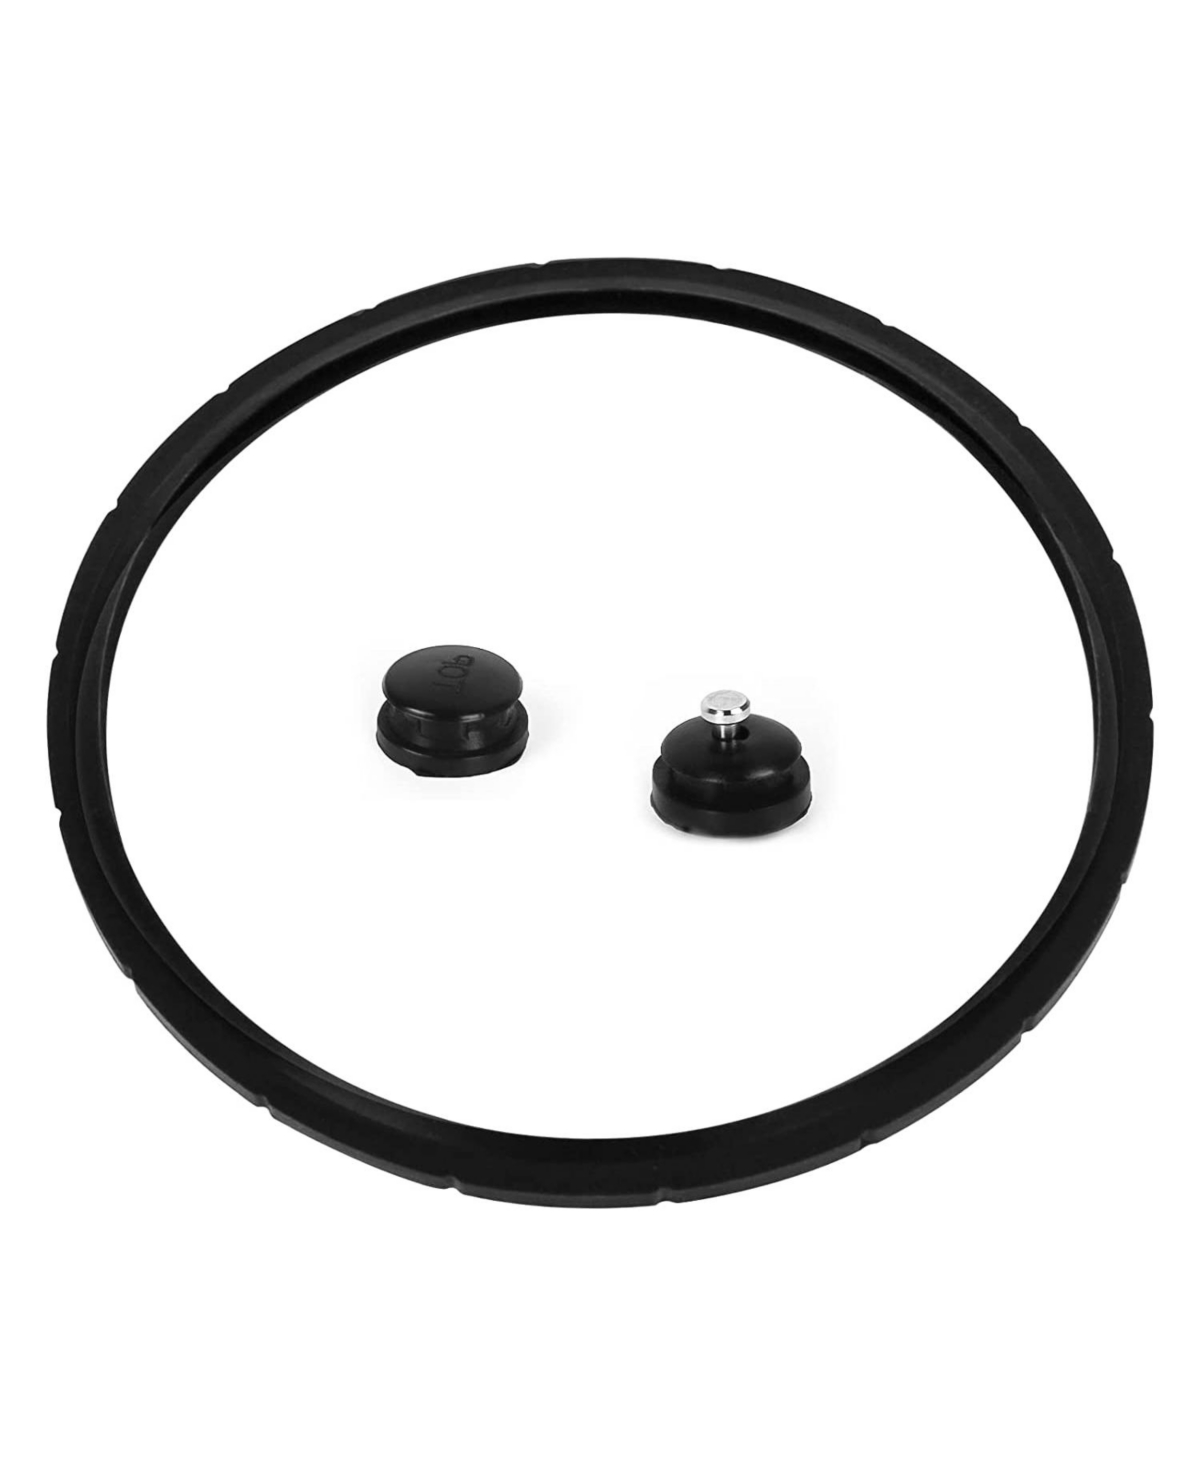 Presto 09905 Pressure Canner Sealing Ring Air Vent And Plug In Black